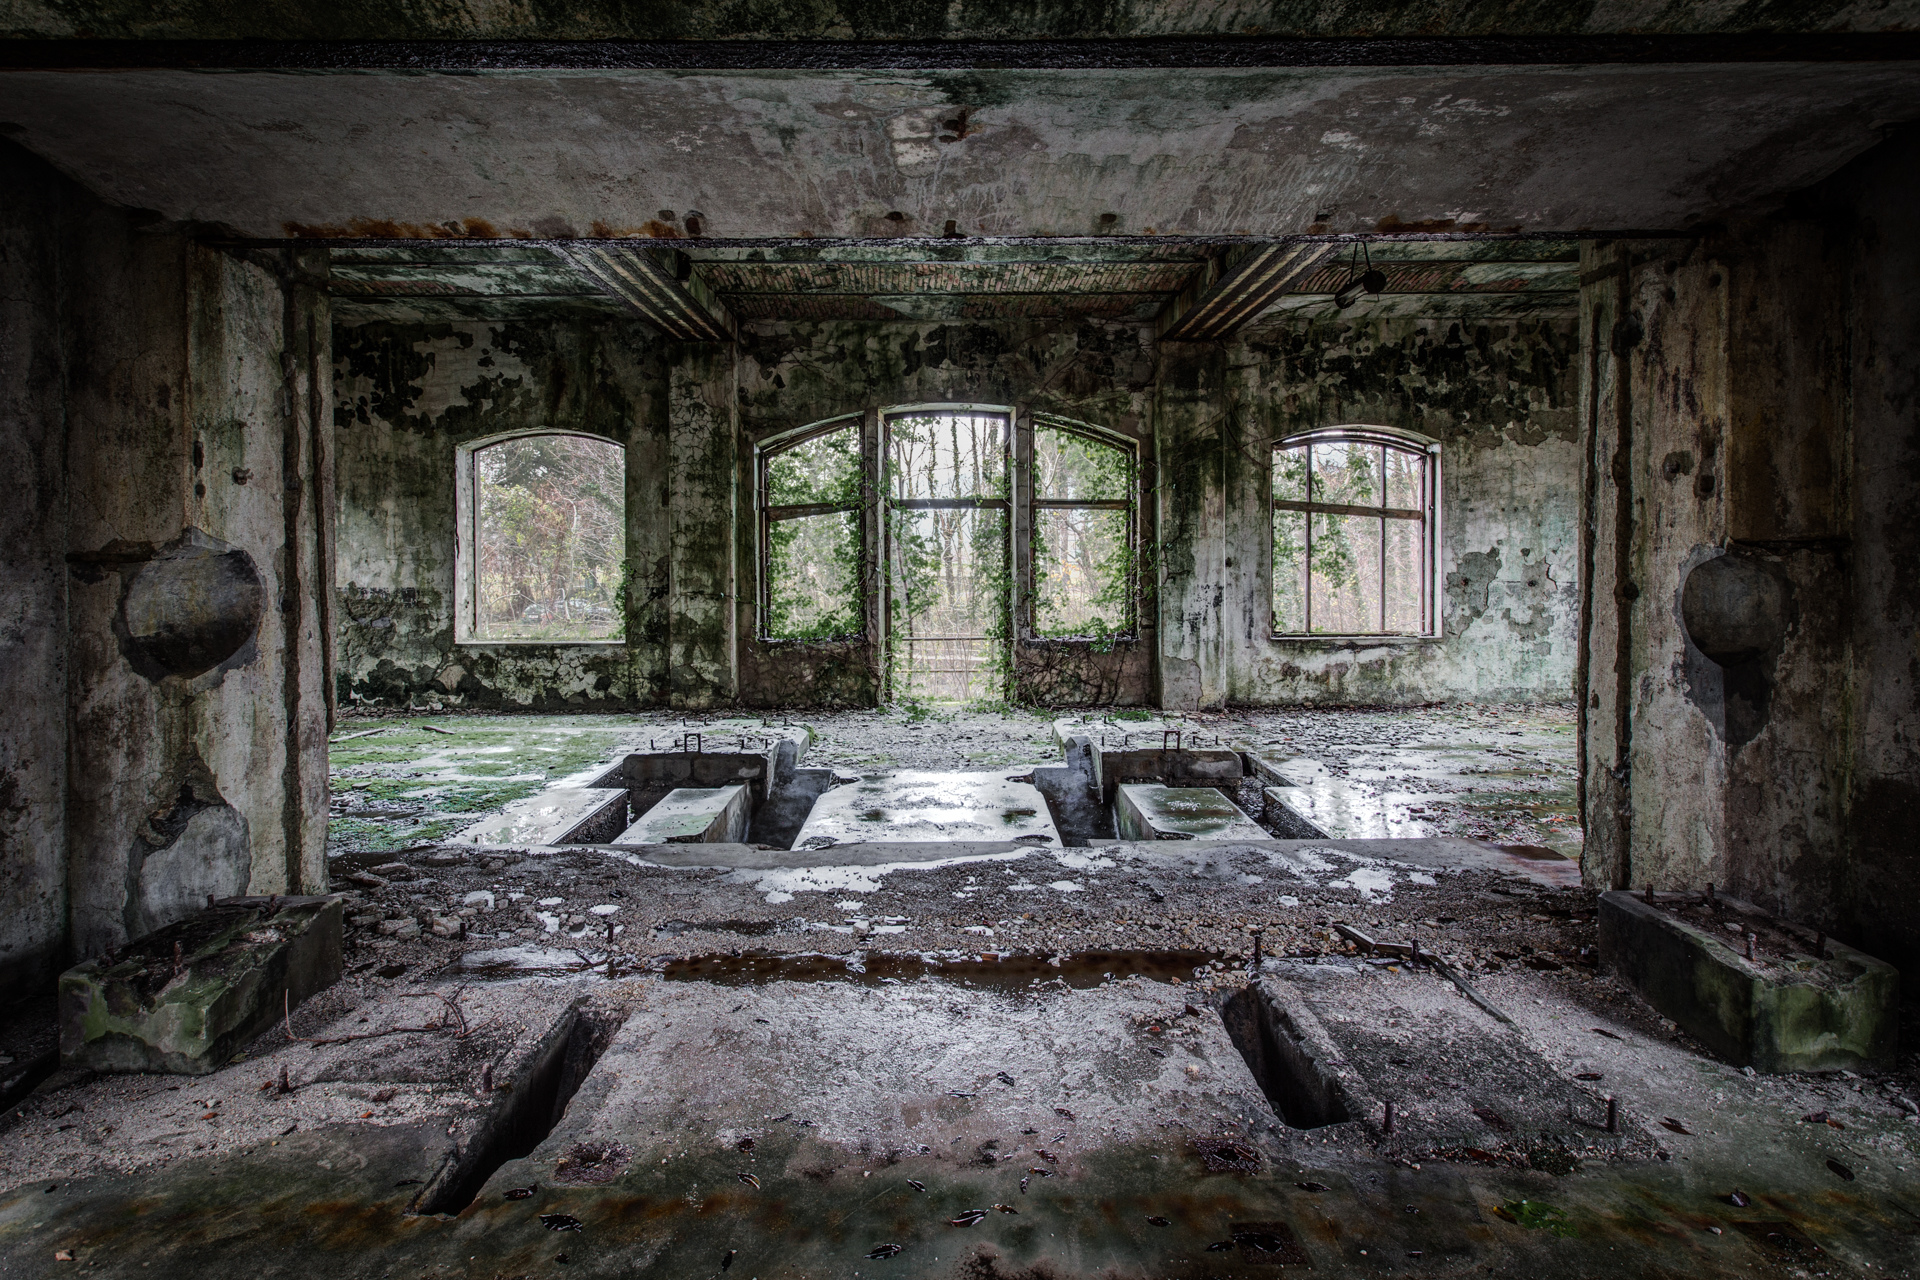 Urban Exploration - Bog Palace - Come In